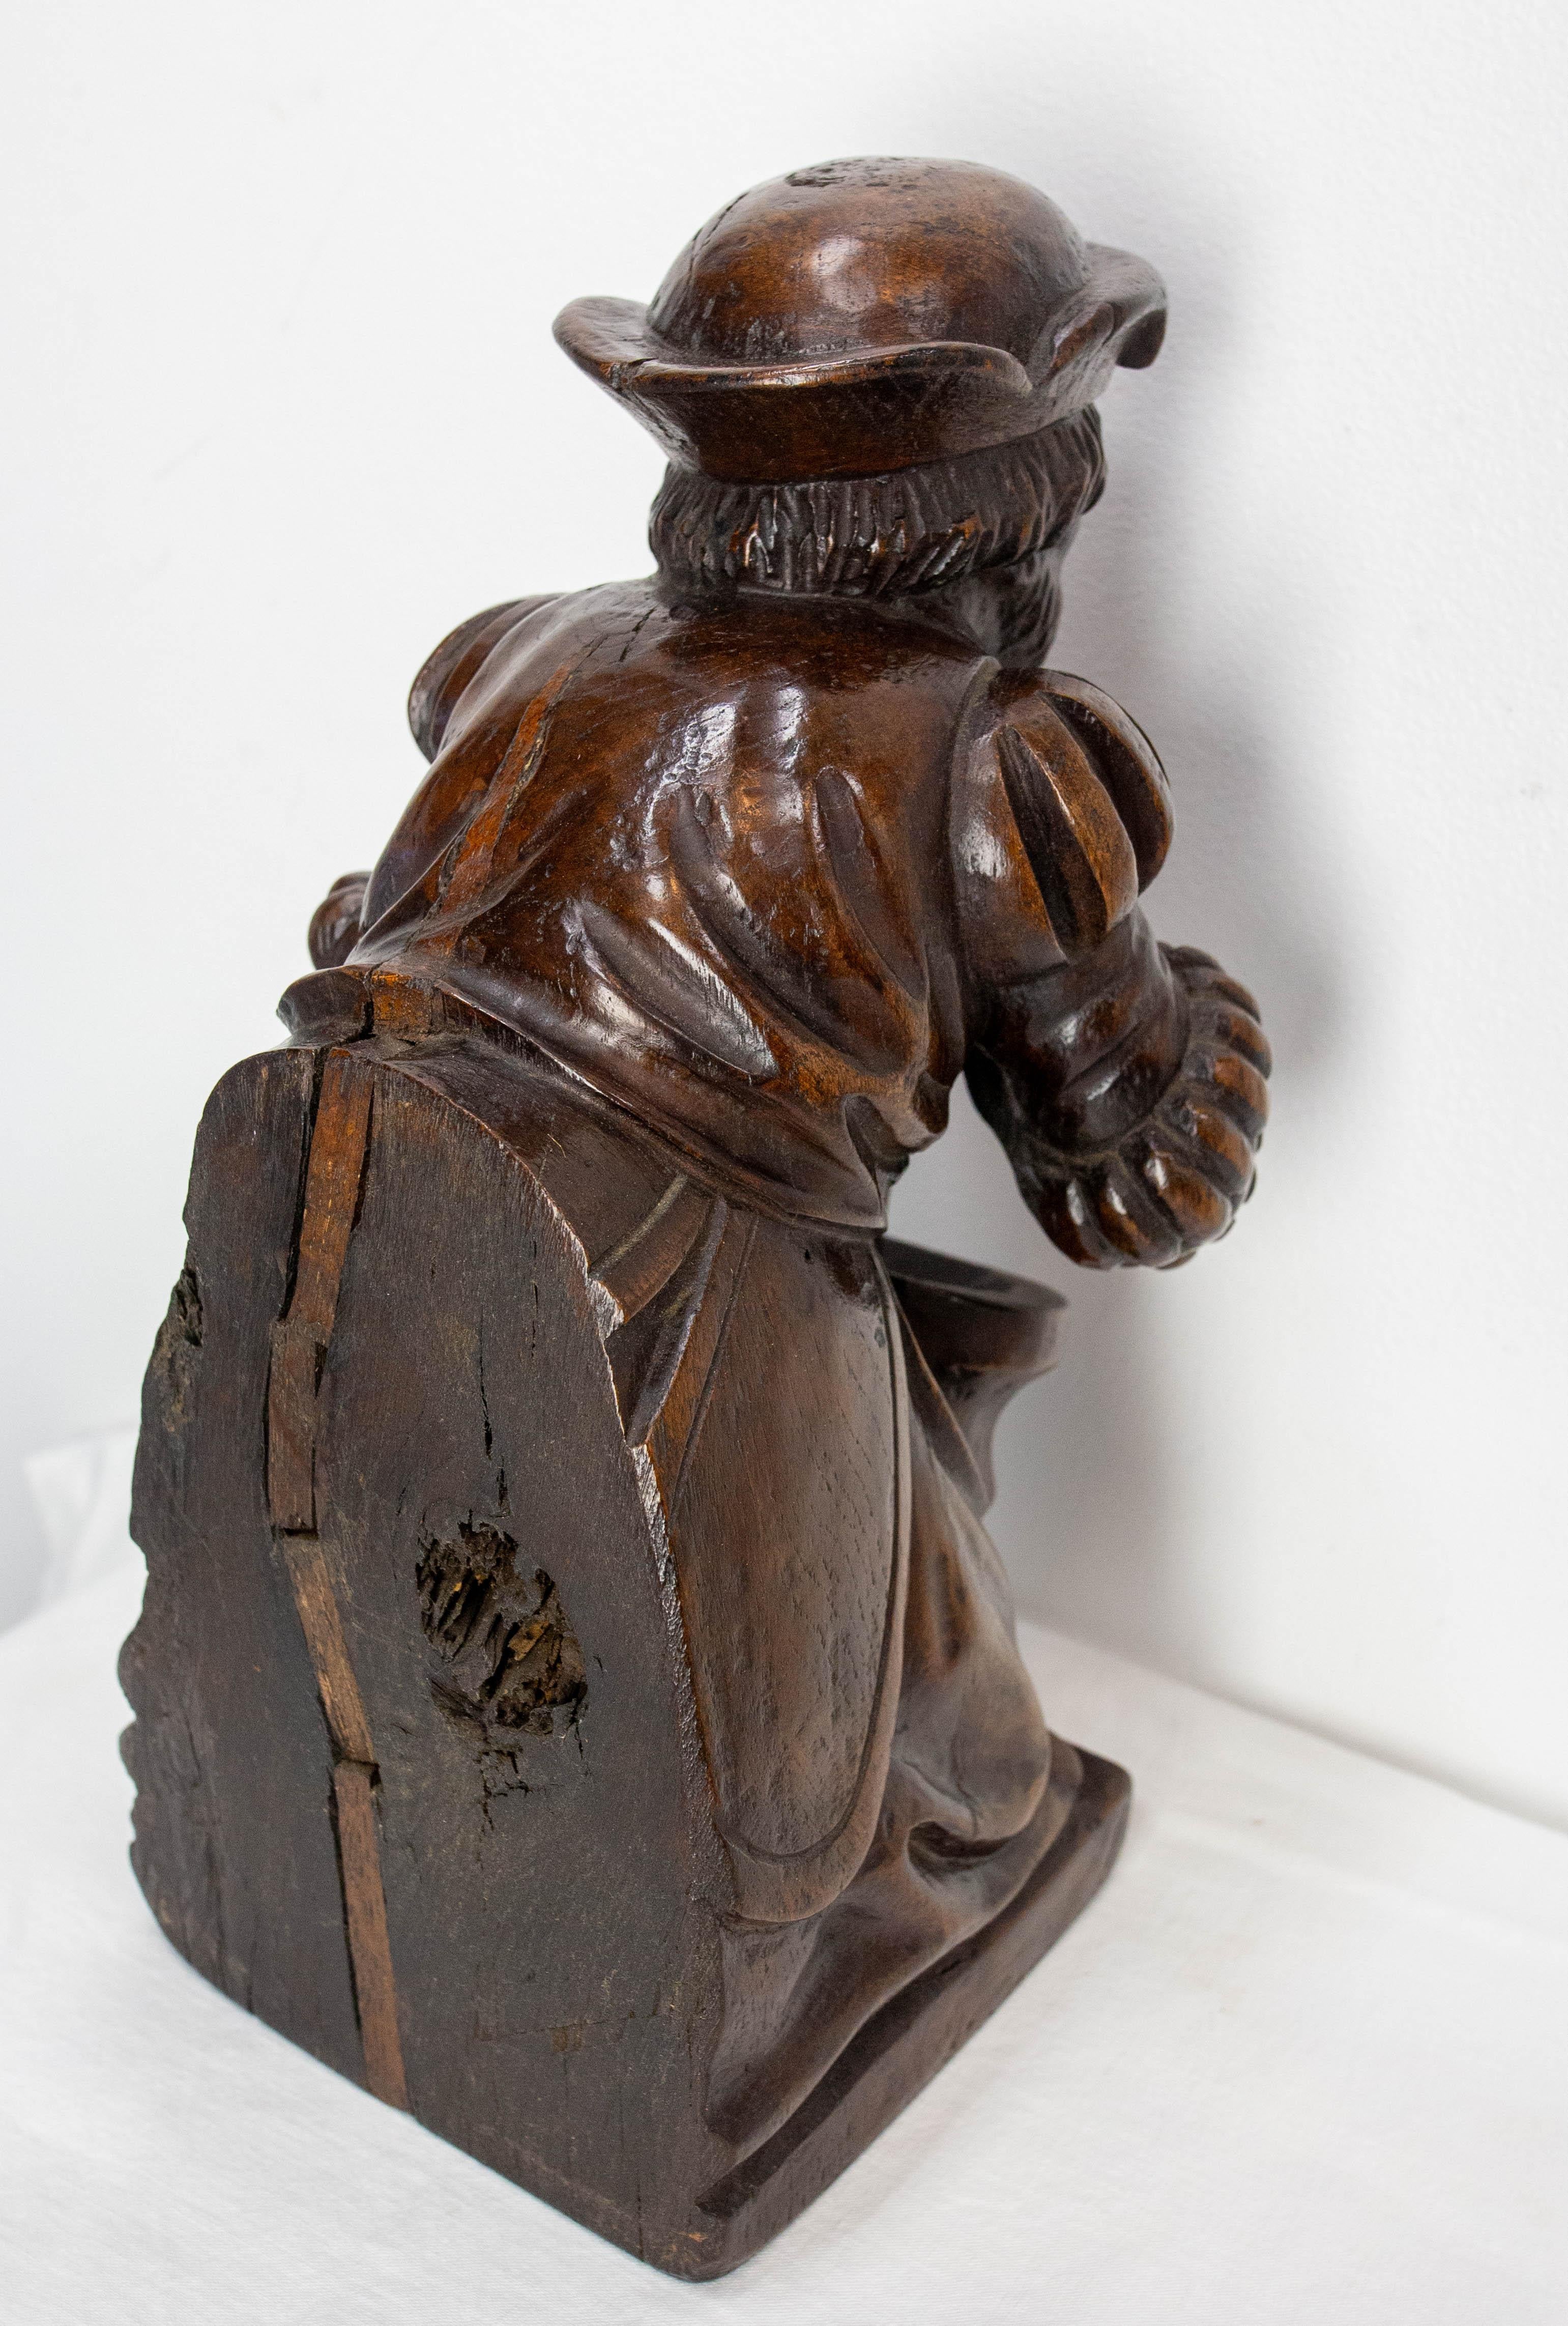 Mid-Century Modern French Oak Statuette The Apothicary Replica From Amiens Cathedral circa 1900 For Sale